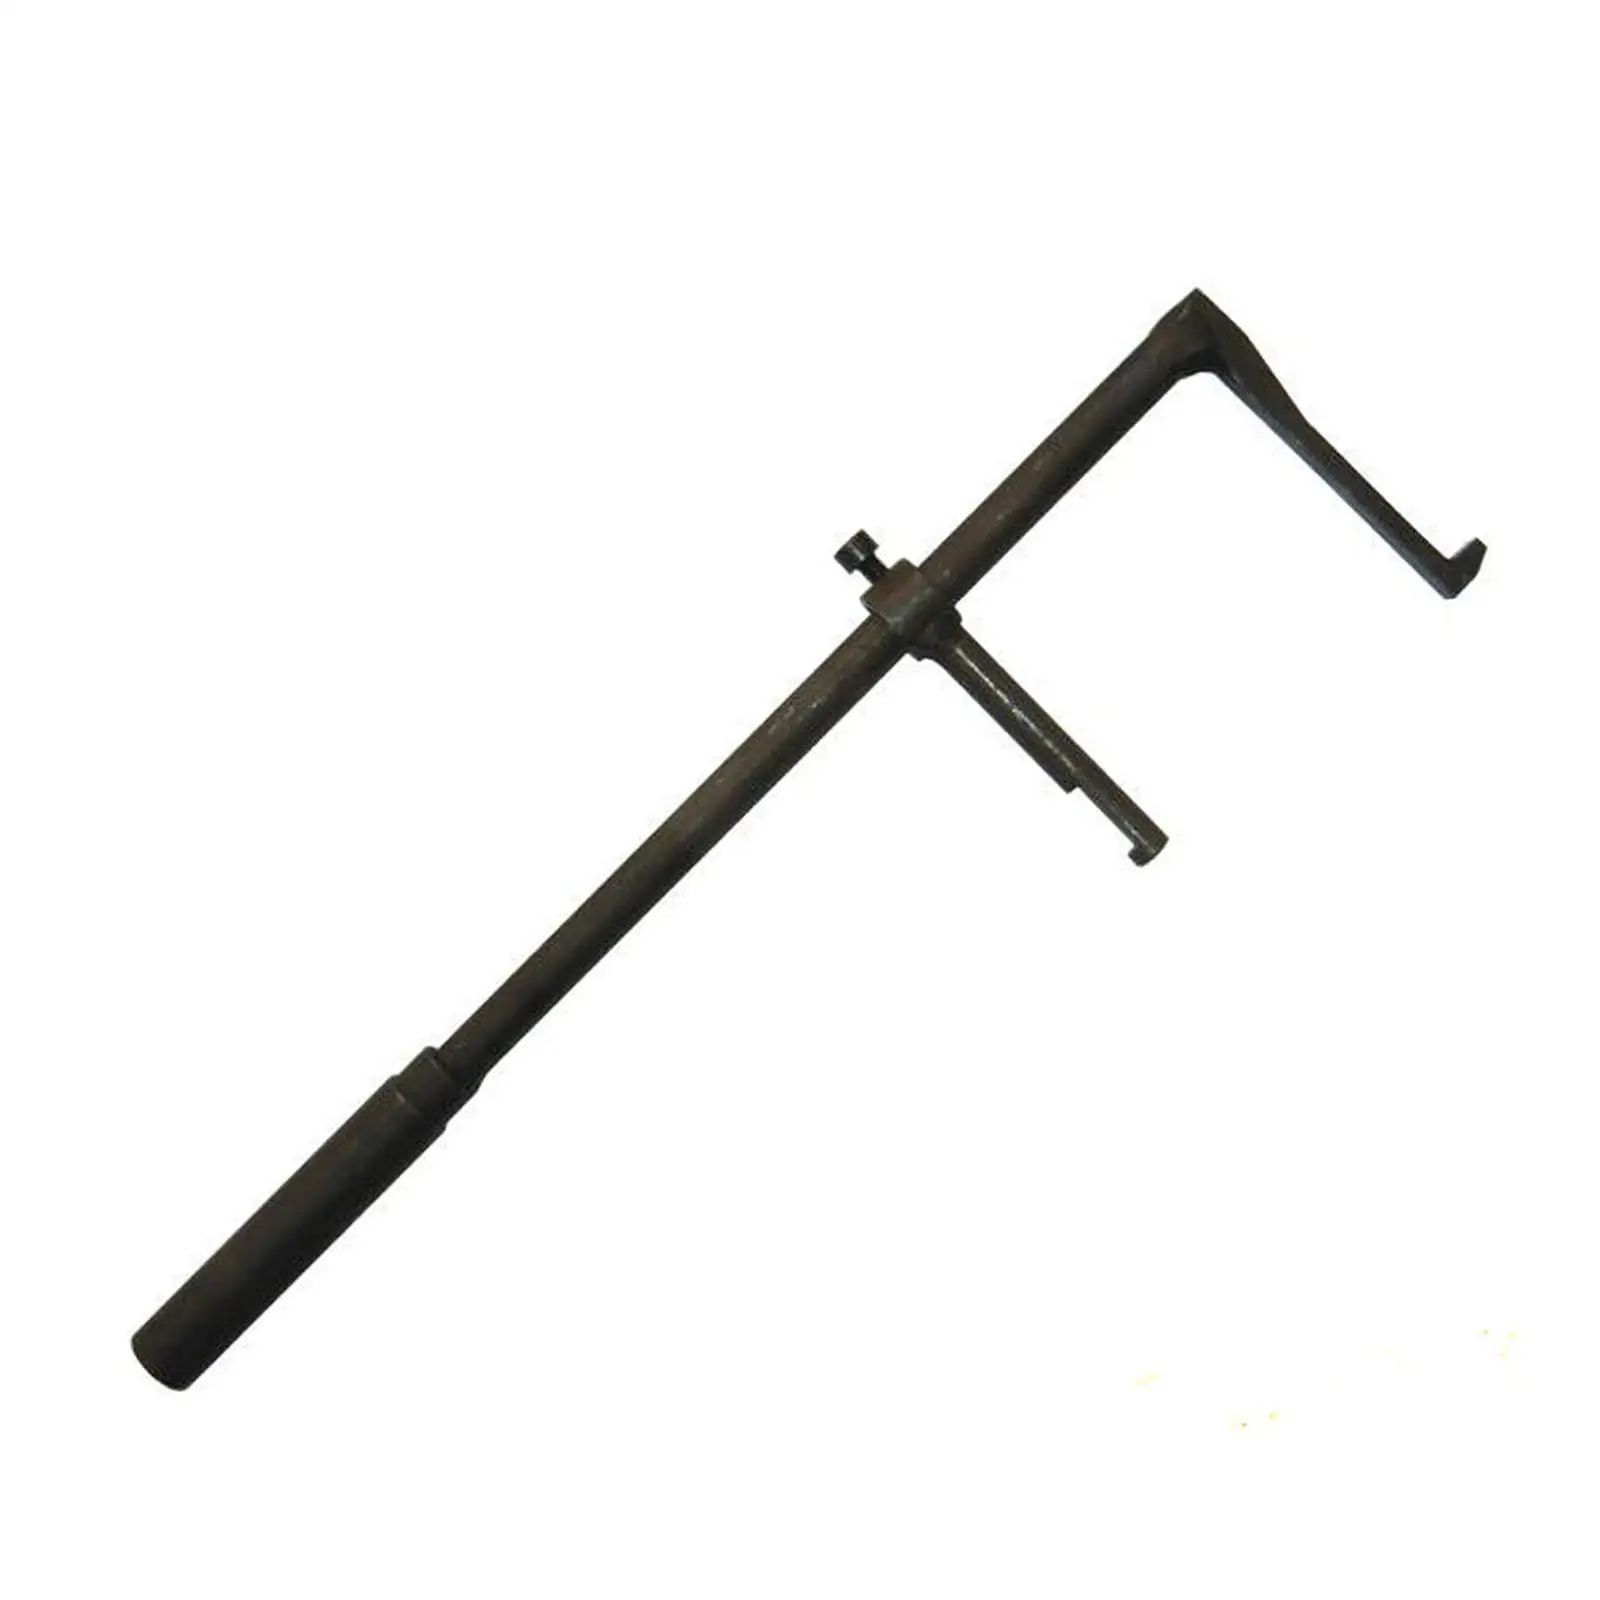 Front Fork Oil Seal Puller Remover Install Tool for Motorcycle Motorbike Durable